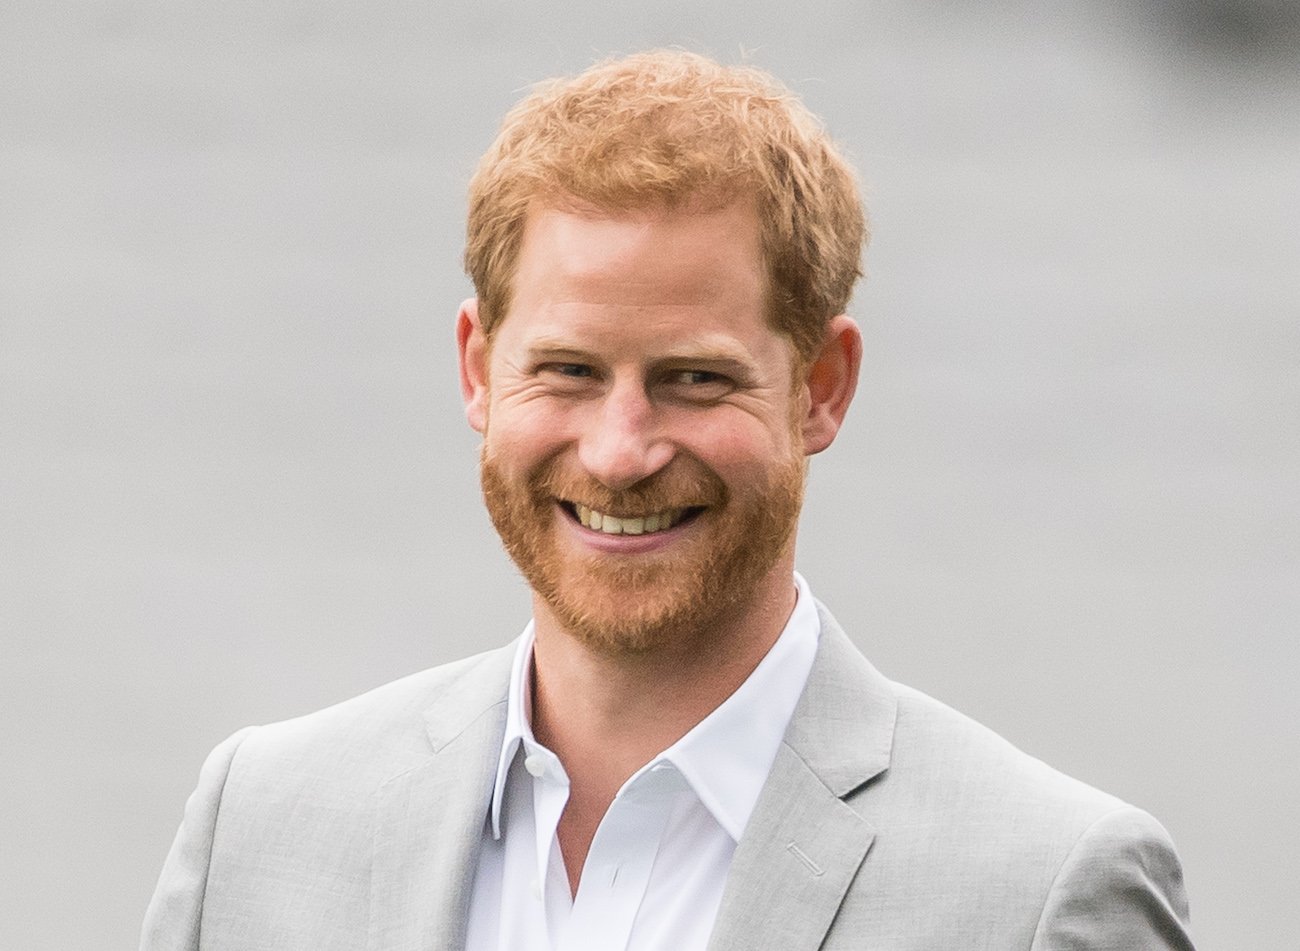 Prince Harry smiling while wearing a gray suit